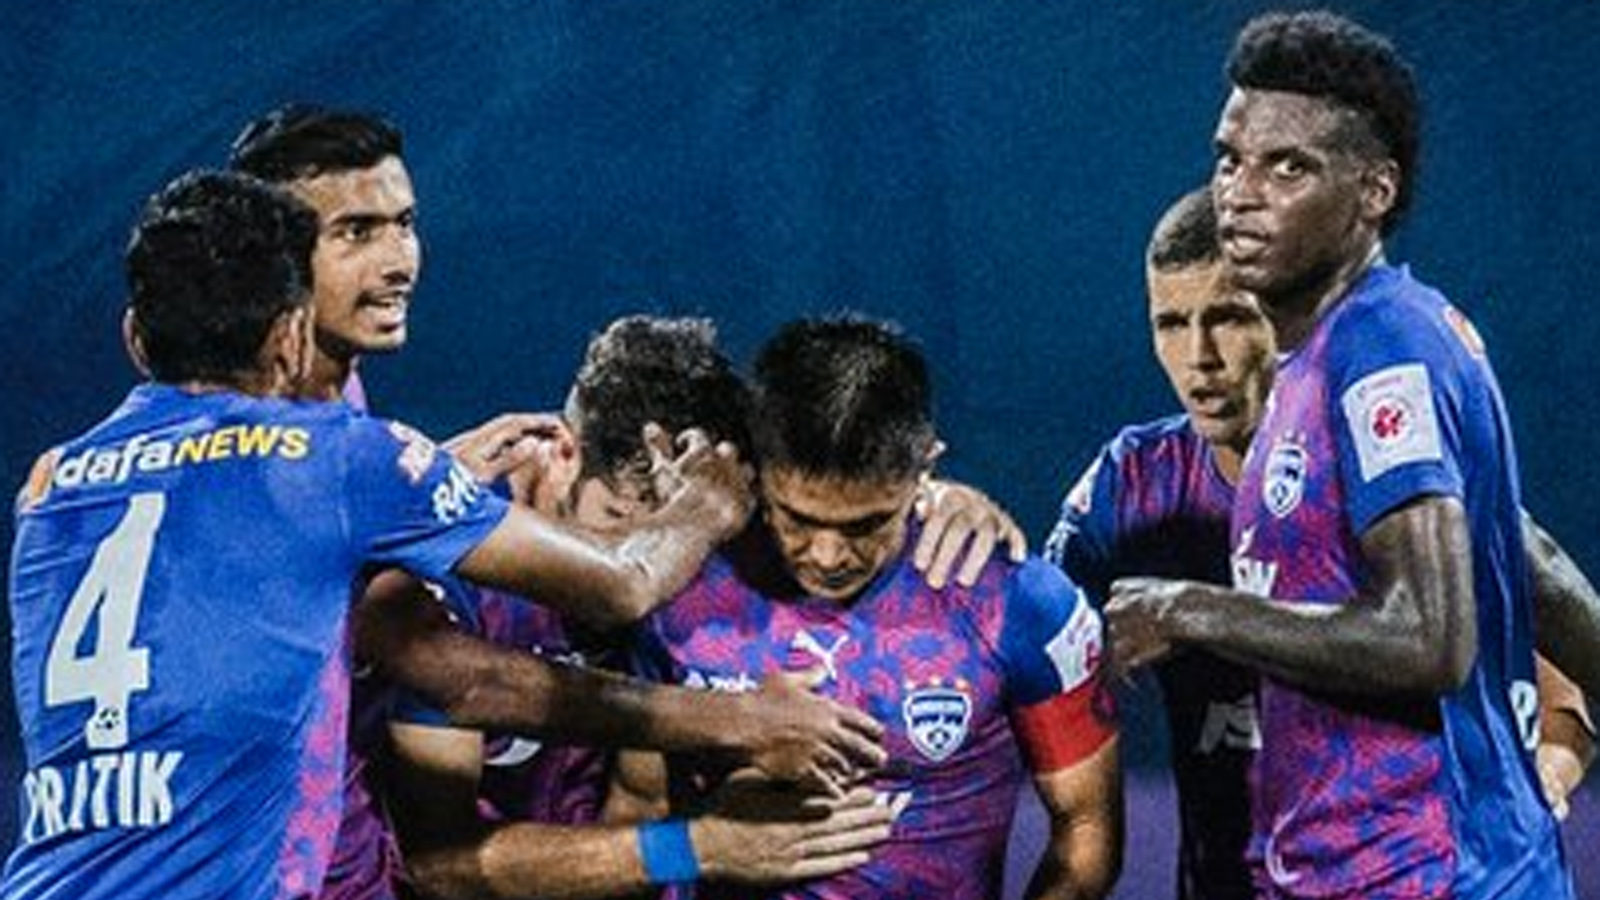 Sunil Chhetri equals record goal in ISL, Bangalore prevents Goa from equalizing